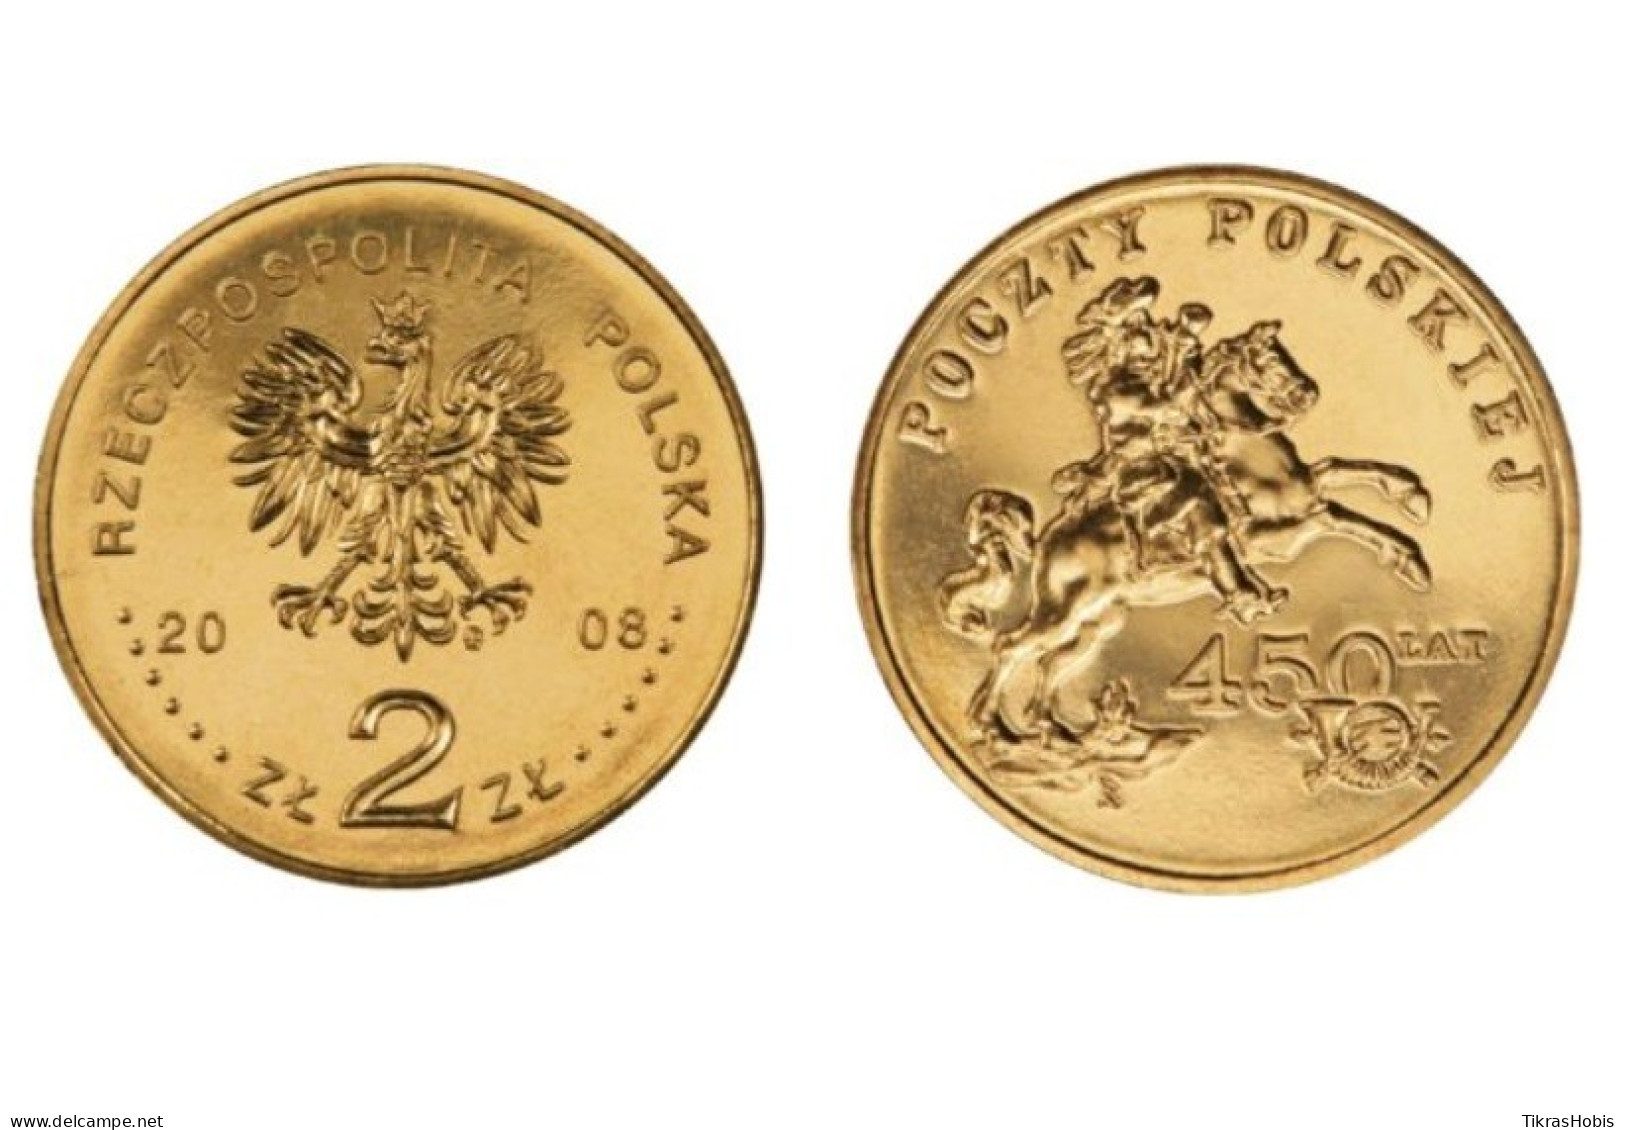 Poland 2 Zlotys, 2008 450 Years For Polish Post Y656 - Polen